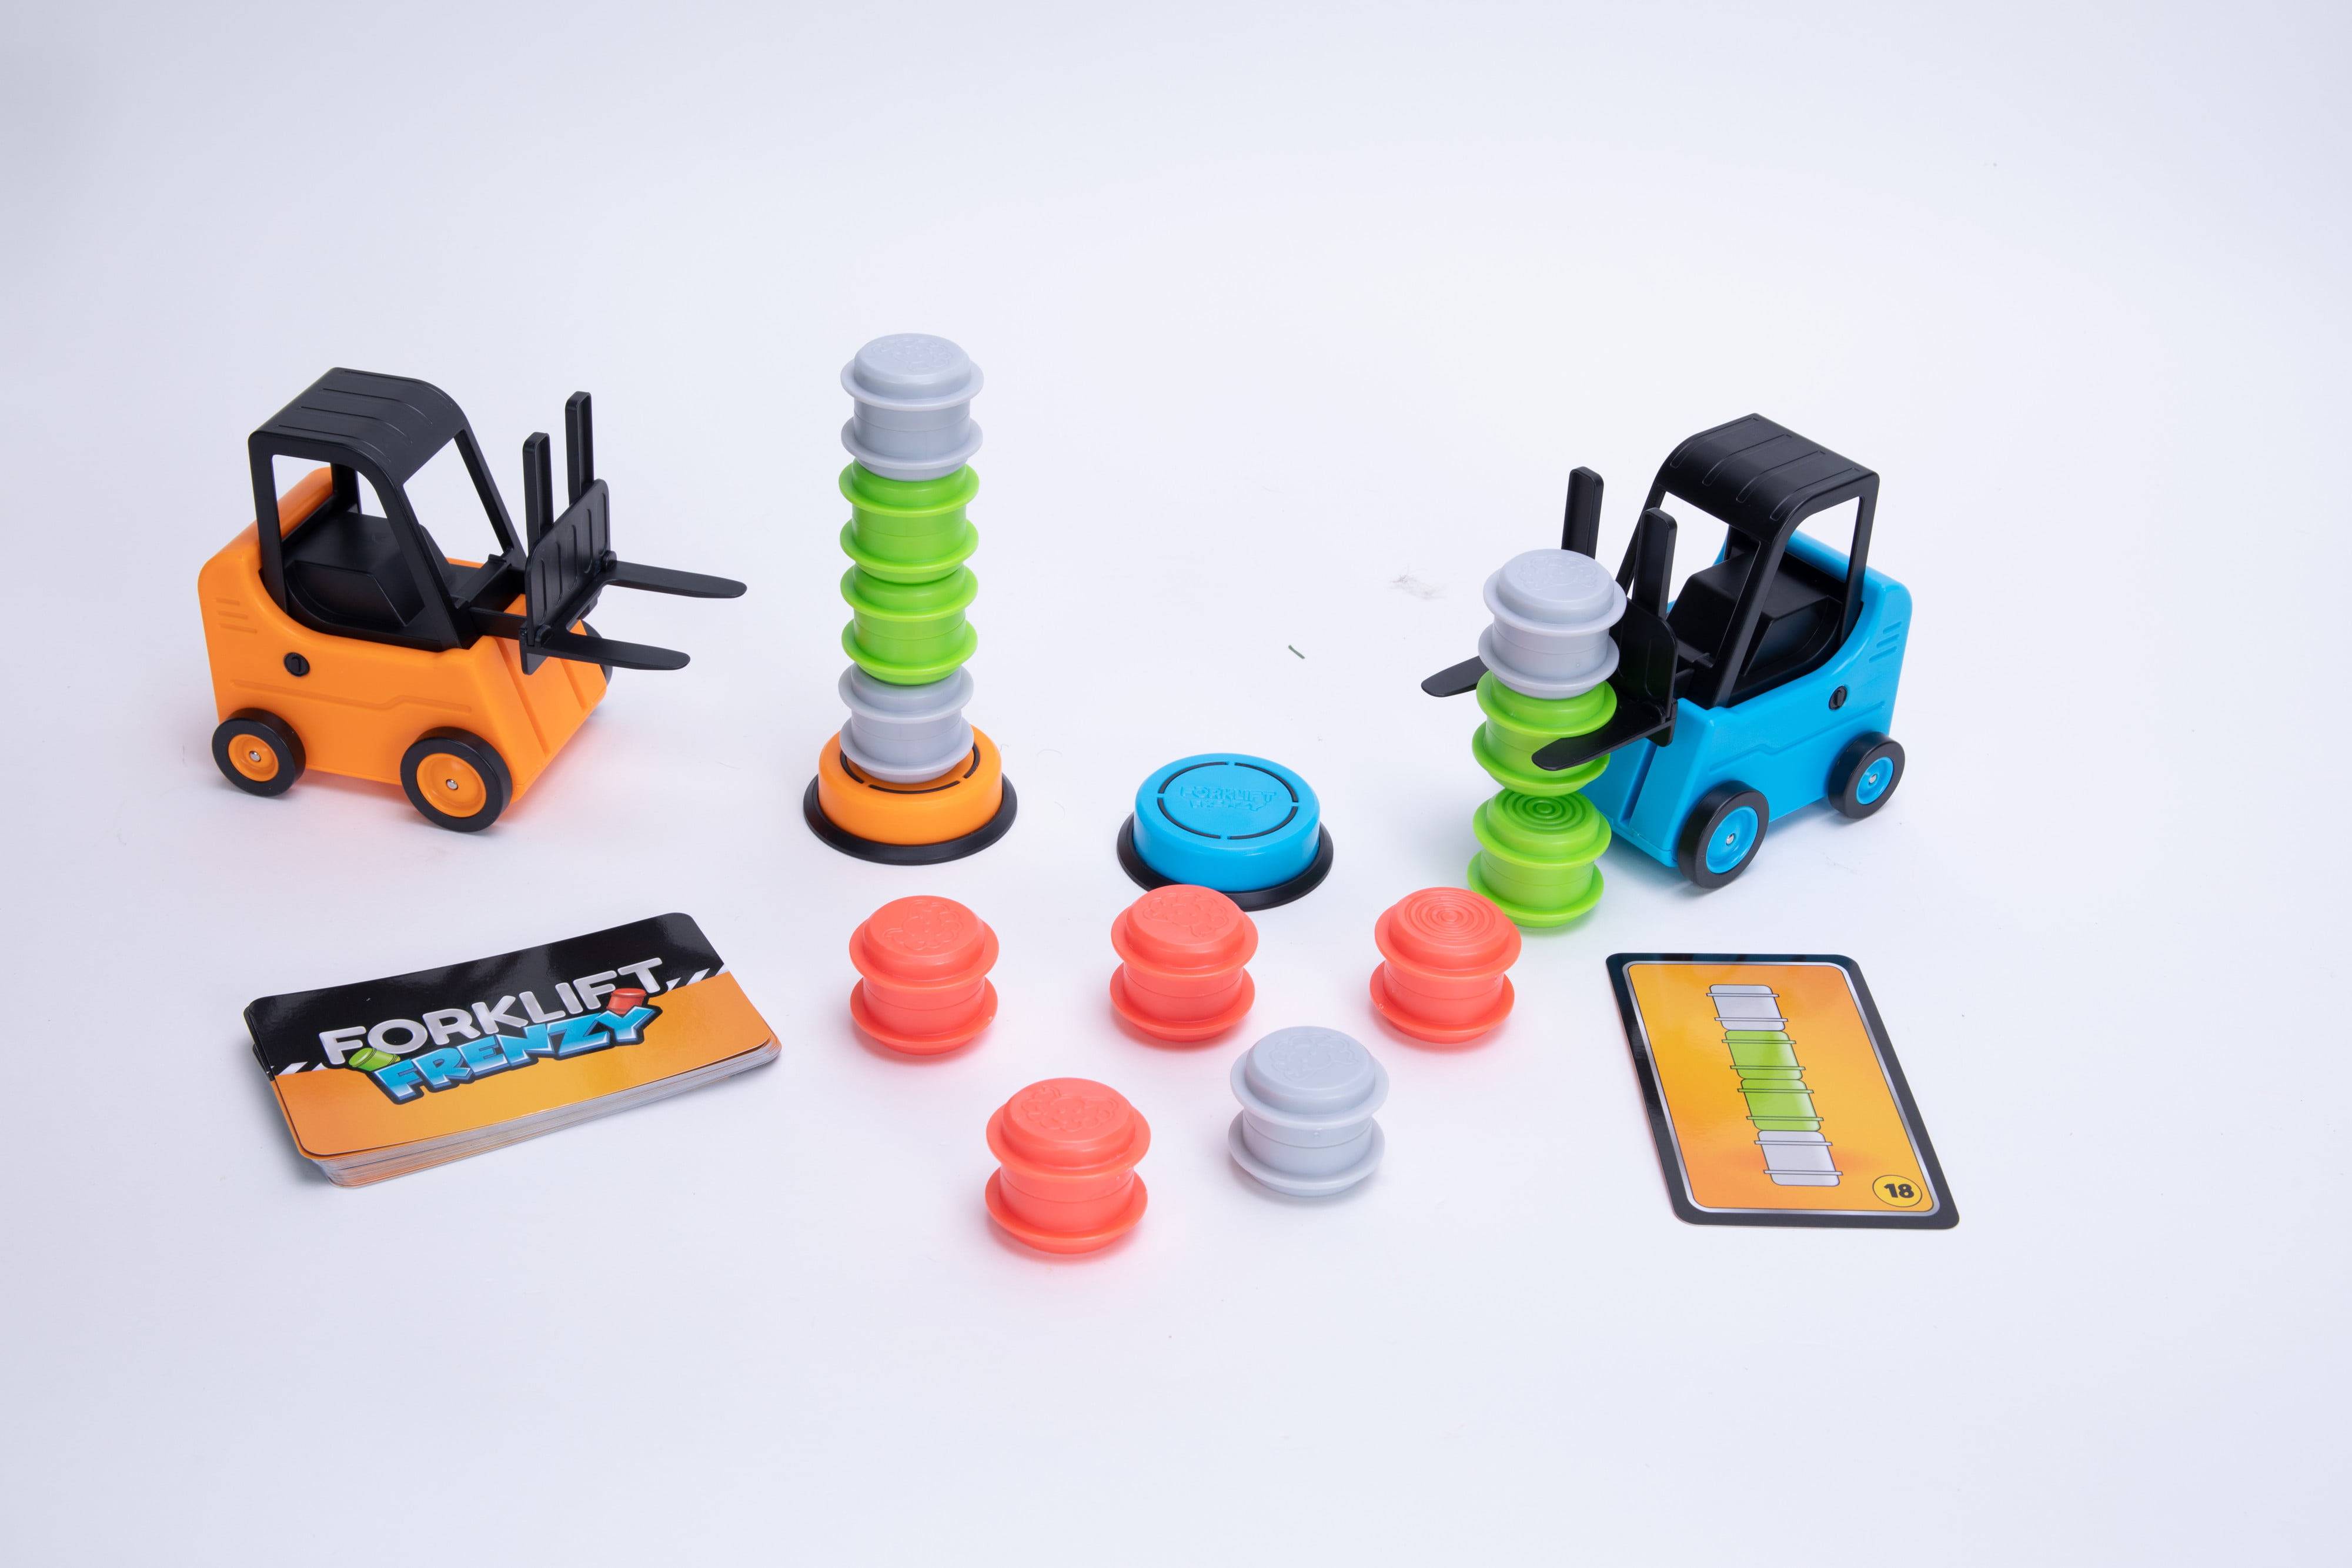  AQWEI Forklift Frenzy - 2-Player Stack & Matching Skill Game, Forklift  Frenzy, Engineer Forklift Transport Game, Forklift Transport Stacking Toys,  Forklift Transport Game (Bell Band) : Toys & Games